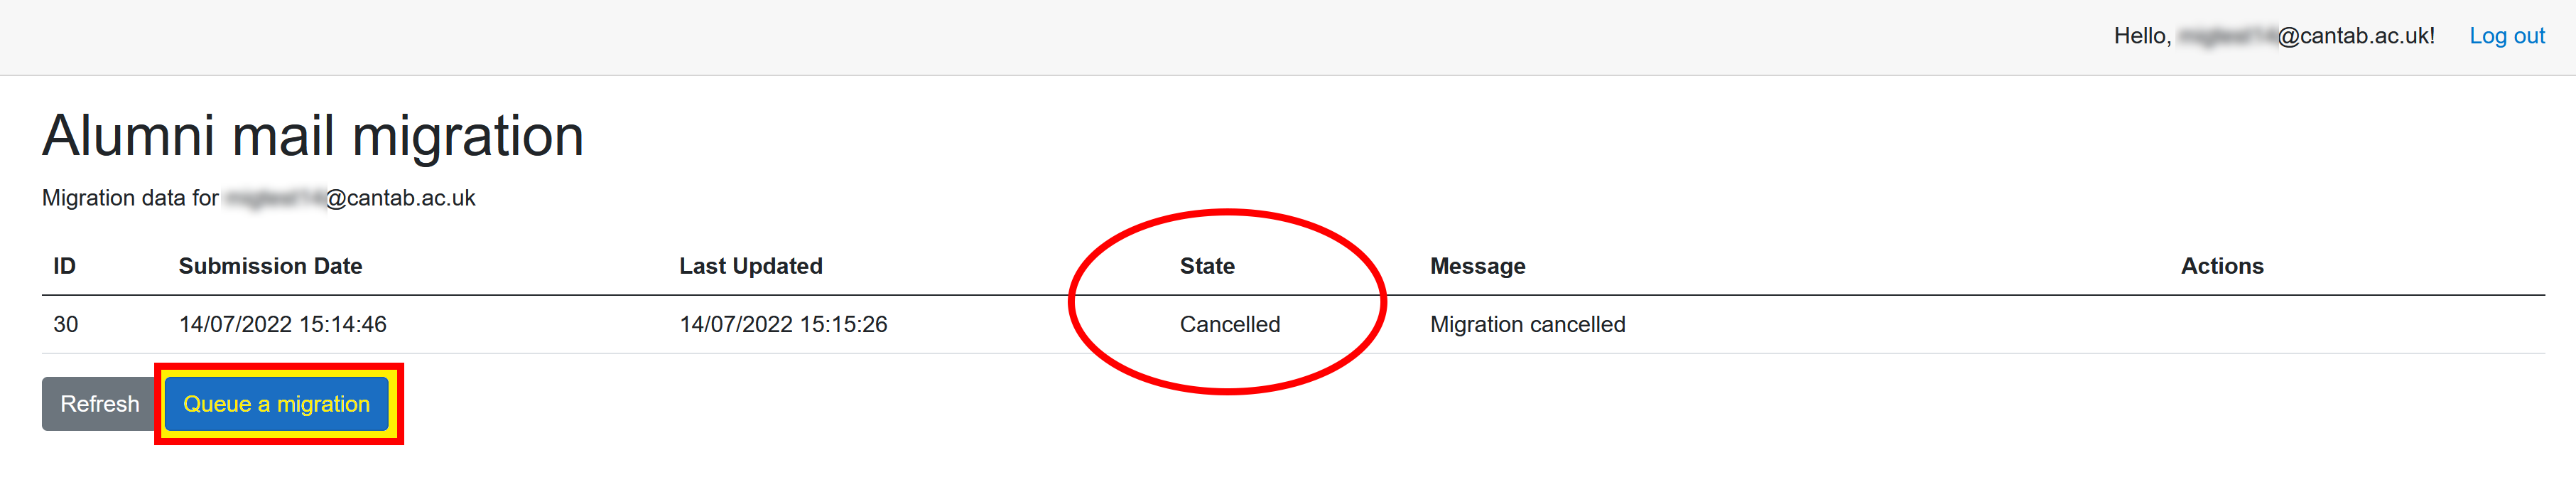 Migration cancelled